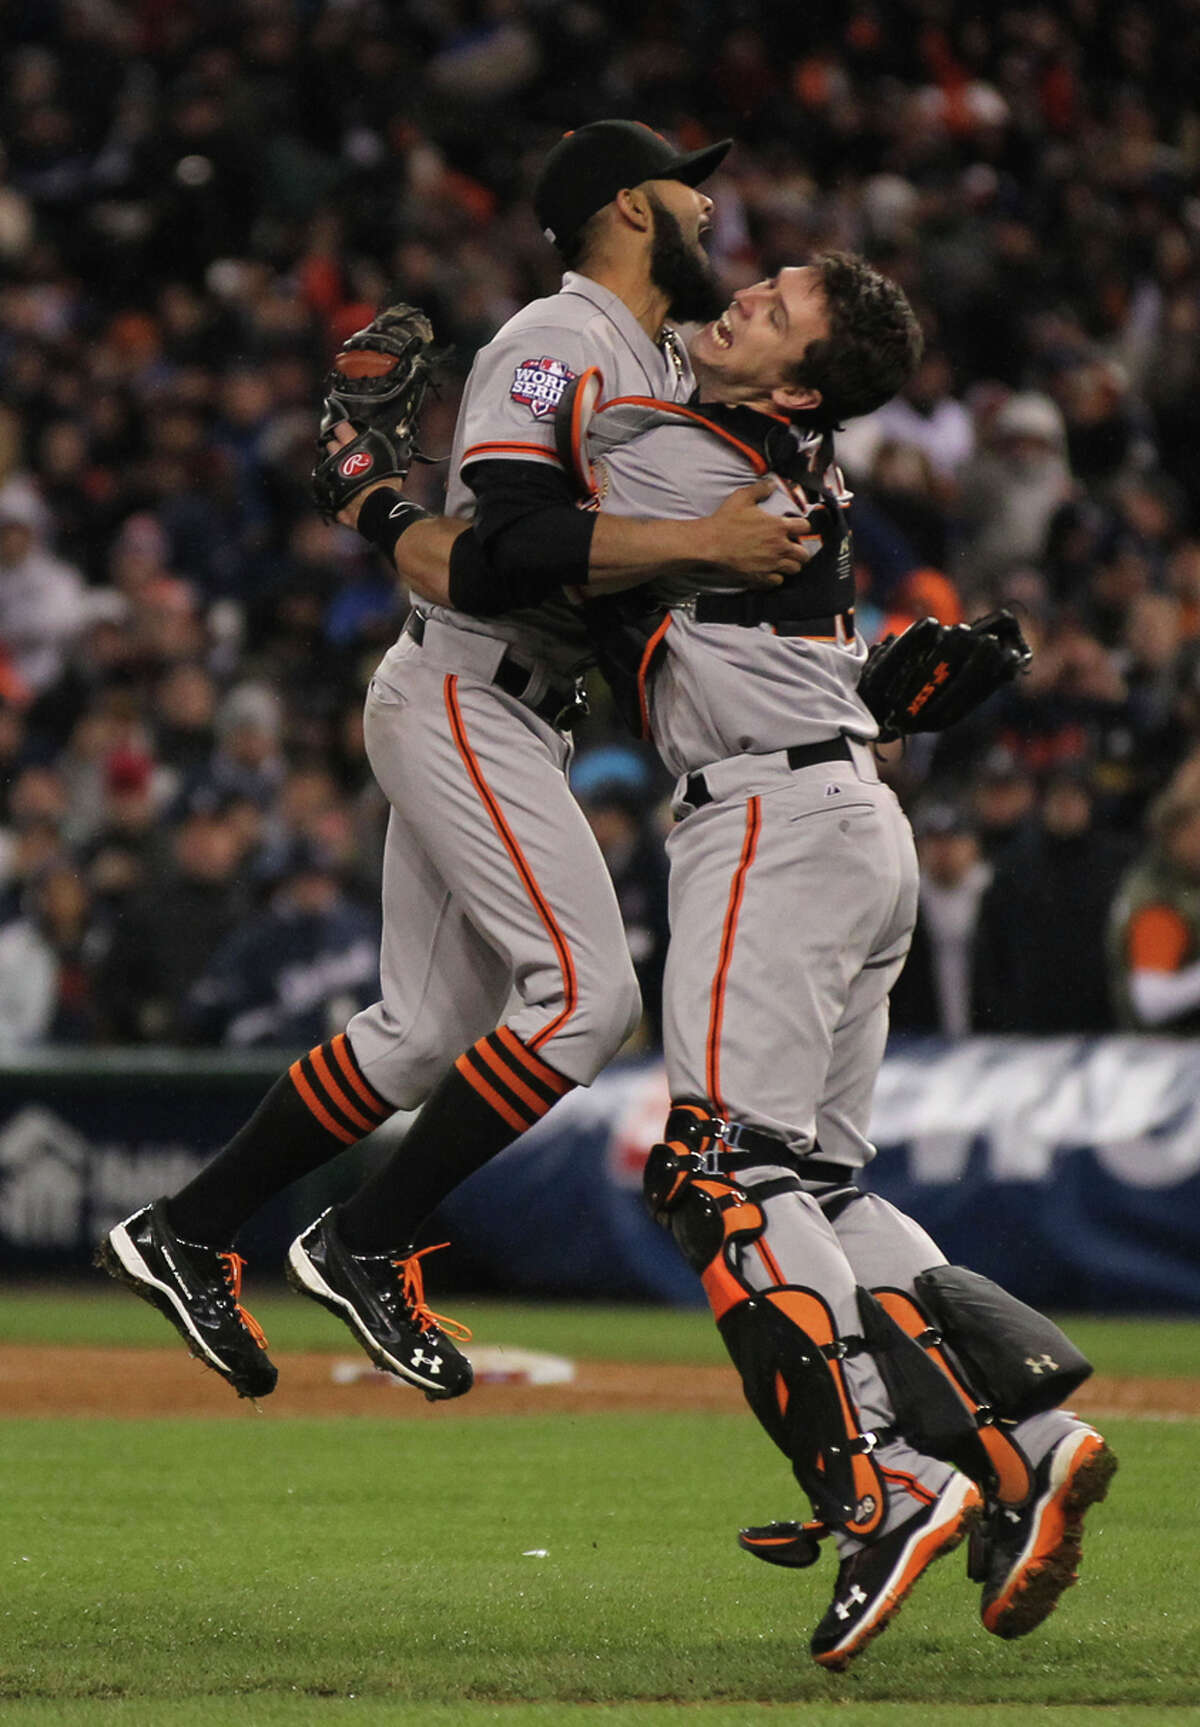 San Francisco Giants Sergio Romo and Buster Posey celebrate their World Series win over the Detroit Tigers at Comerica Park in Detroit, Mi., Sunday, Oct. 28, 2012.